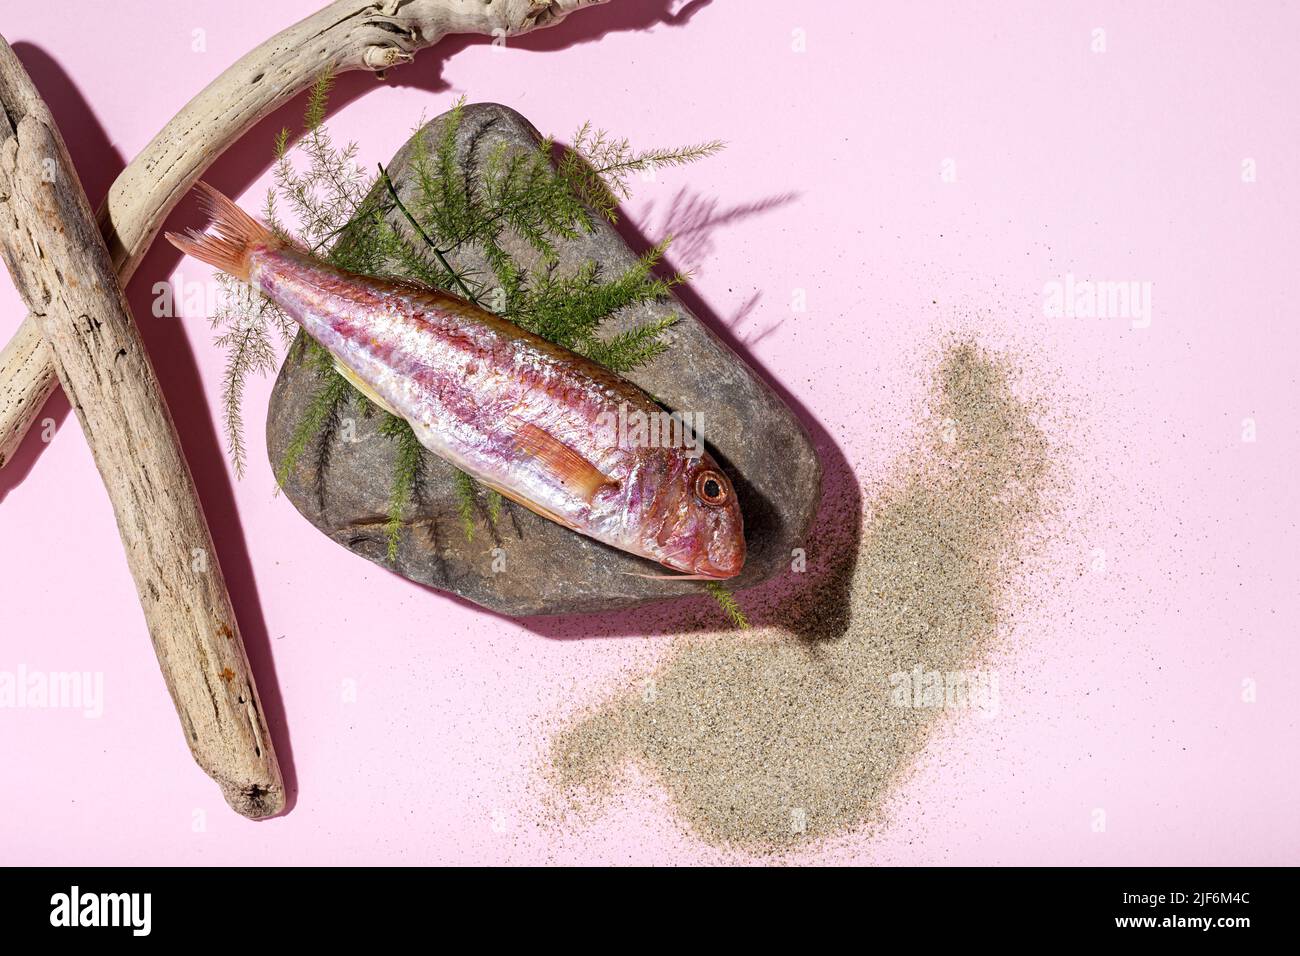 Top view of red mullus barbatus fish placed on rock and fern near dry sticks and sand on pink background Stock Photo